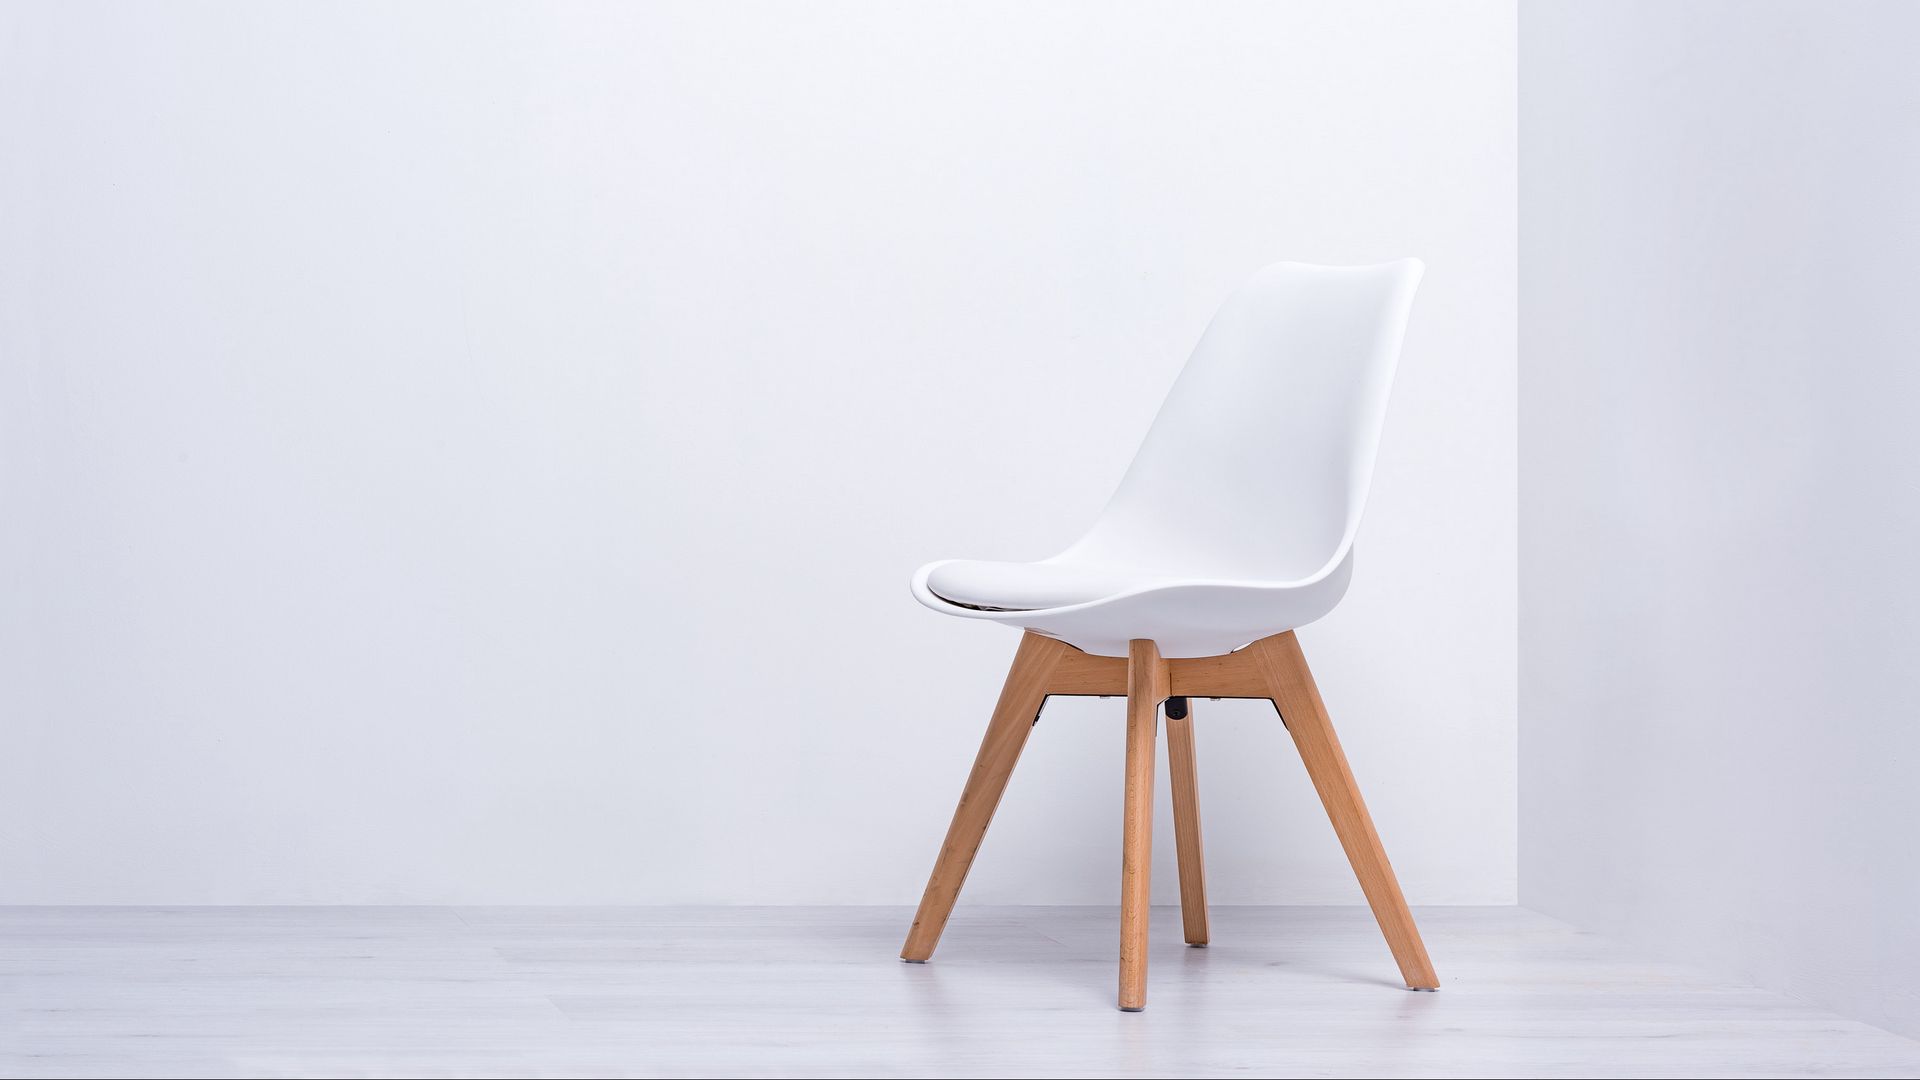 Download wallpaper 1920x1080 chair, white, minimalism, wall full hd, hdtv,  fhd, 1080p hd background